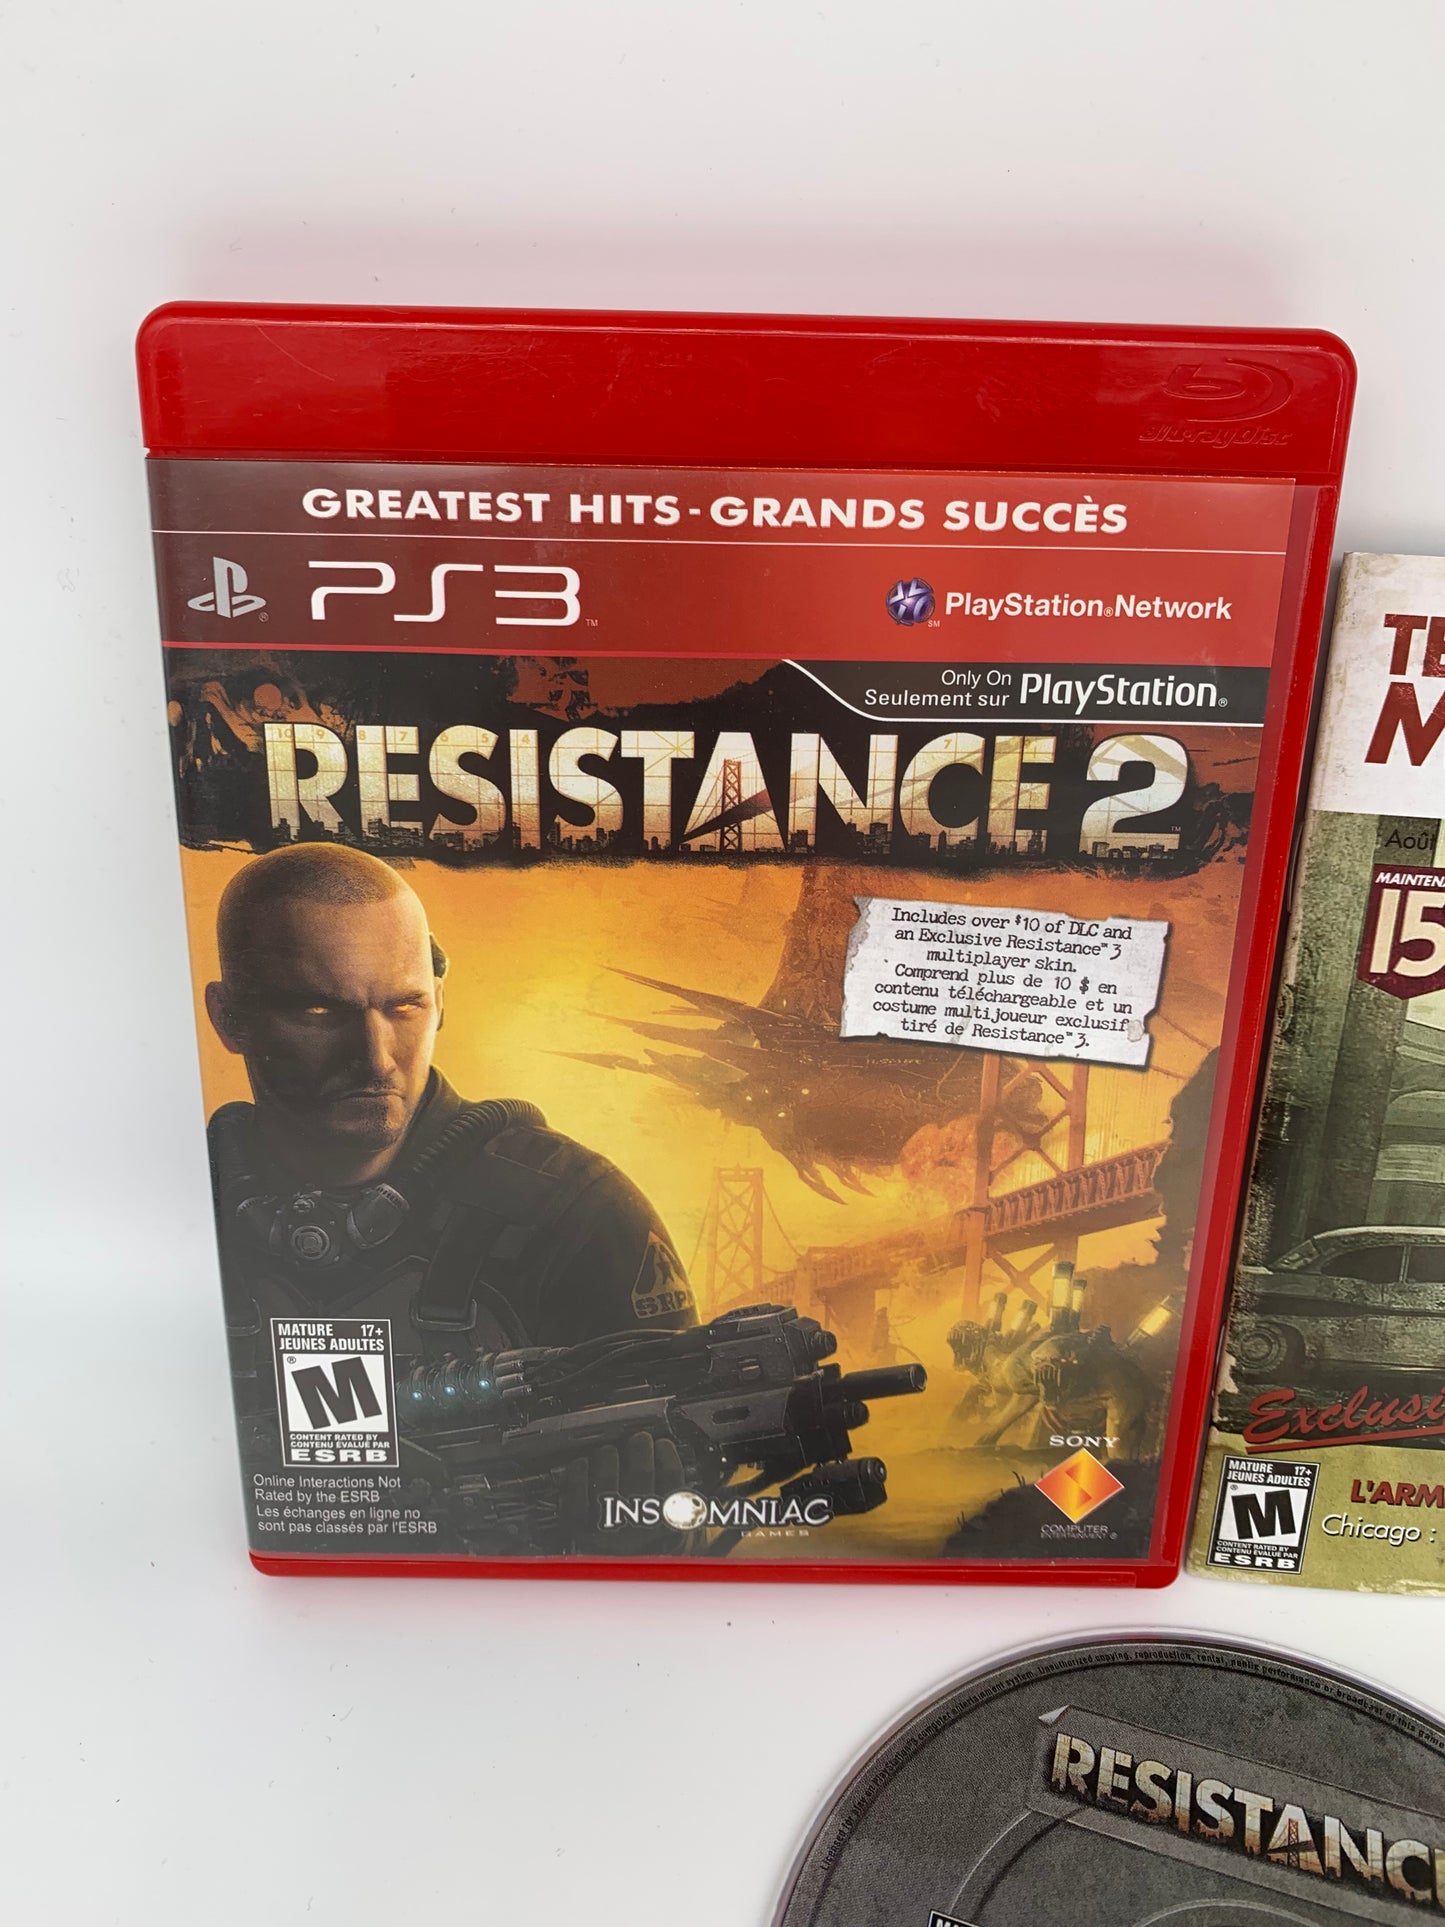 SONY PLAYSTATiON 3 [PS3] | RESiSTANCE 2 | GREATEST HiTS